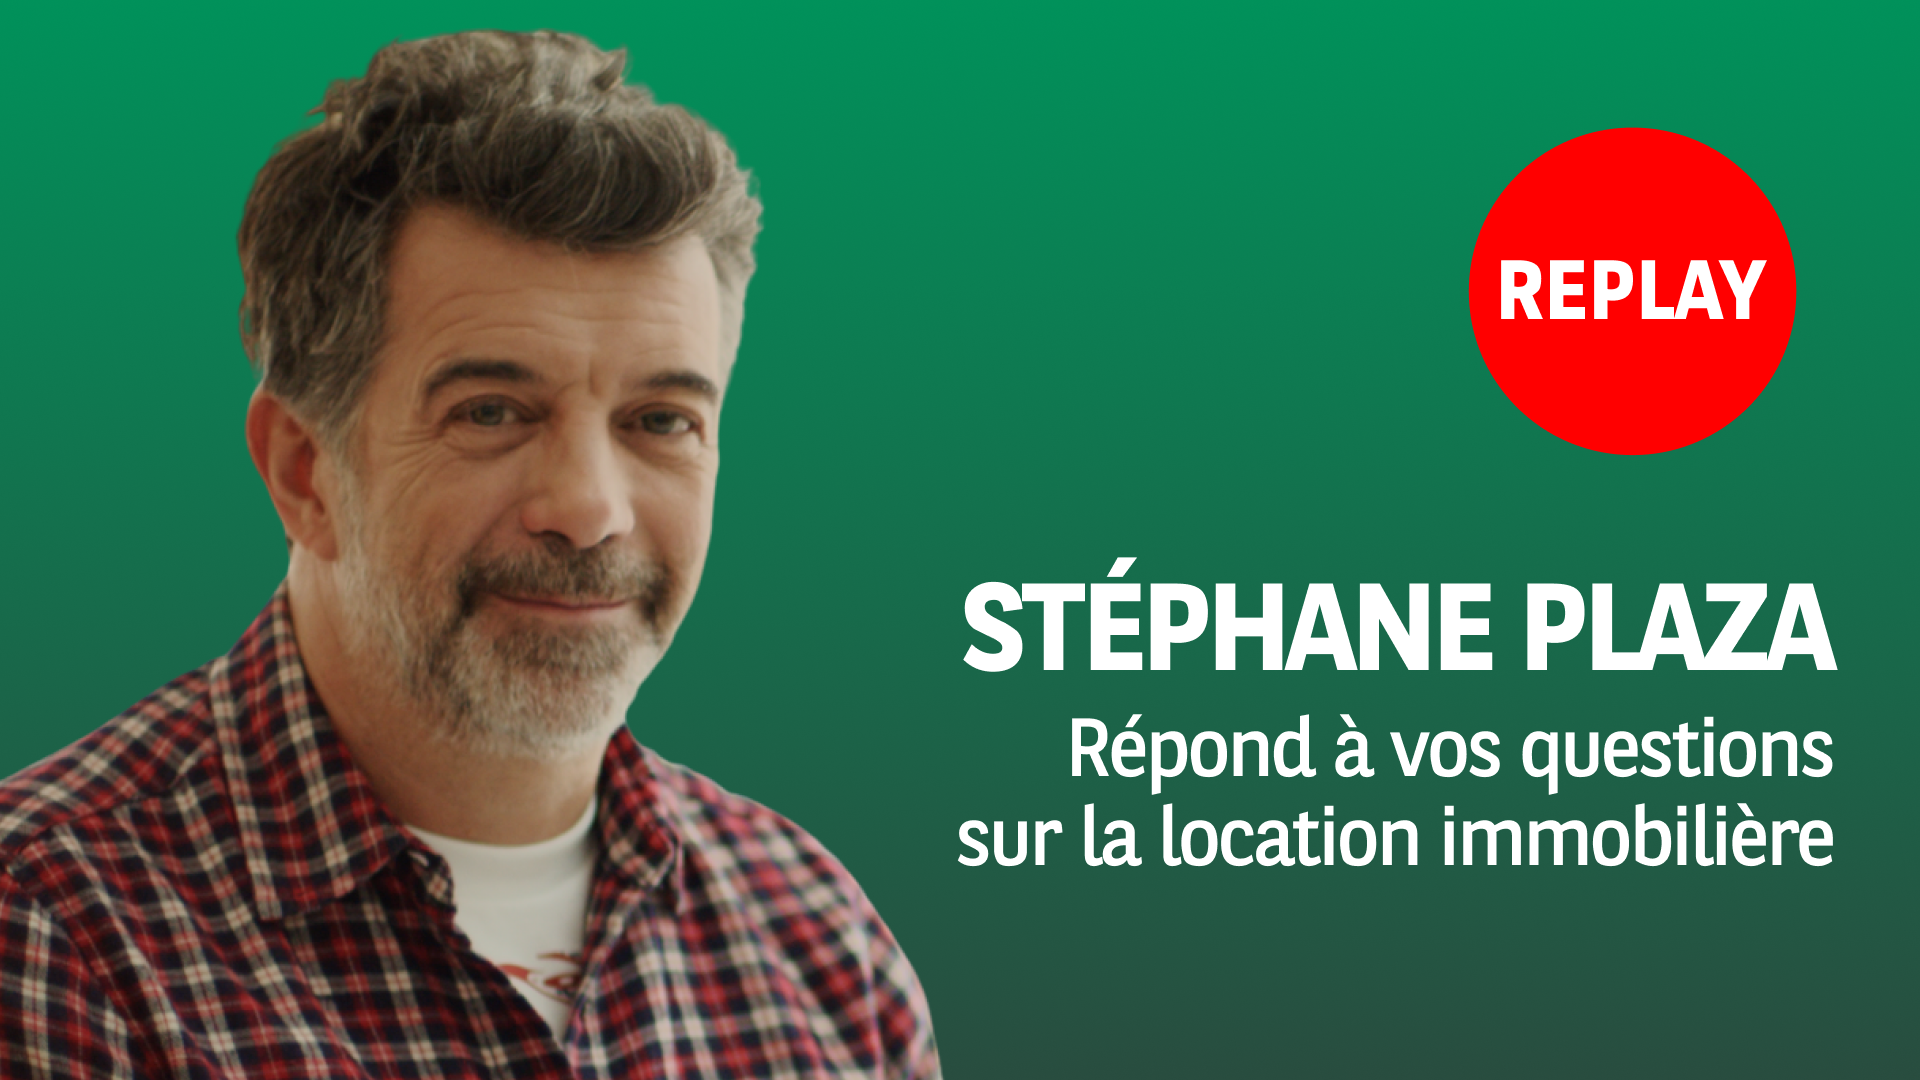 stephane-plaza-repond-a-vos-question-sur-location-immobiliere.png